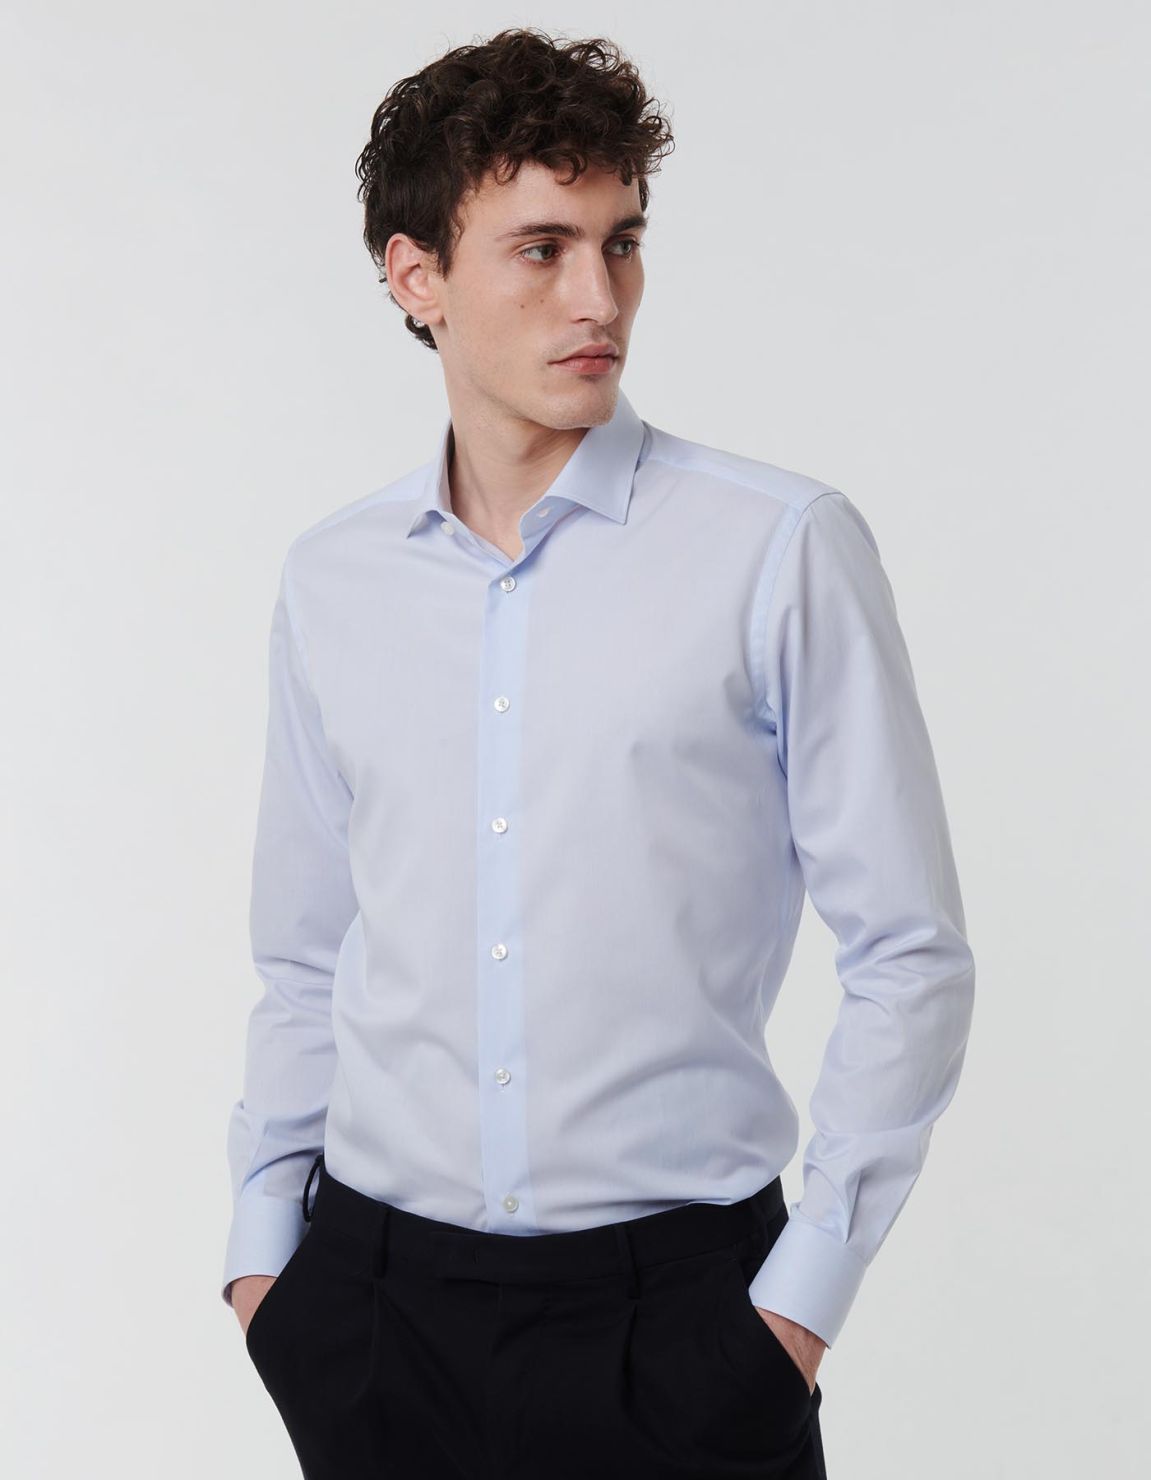 White Twill Solid colour Shirt Collar small cutaway Evolution Classic Fit 9